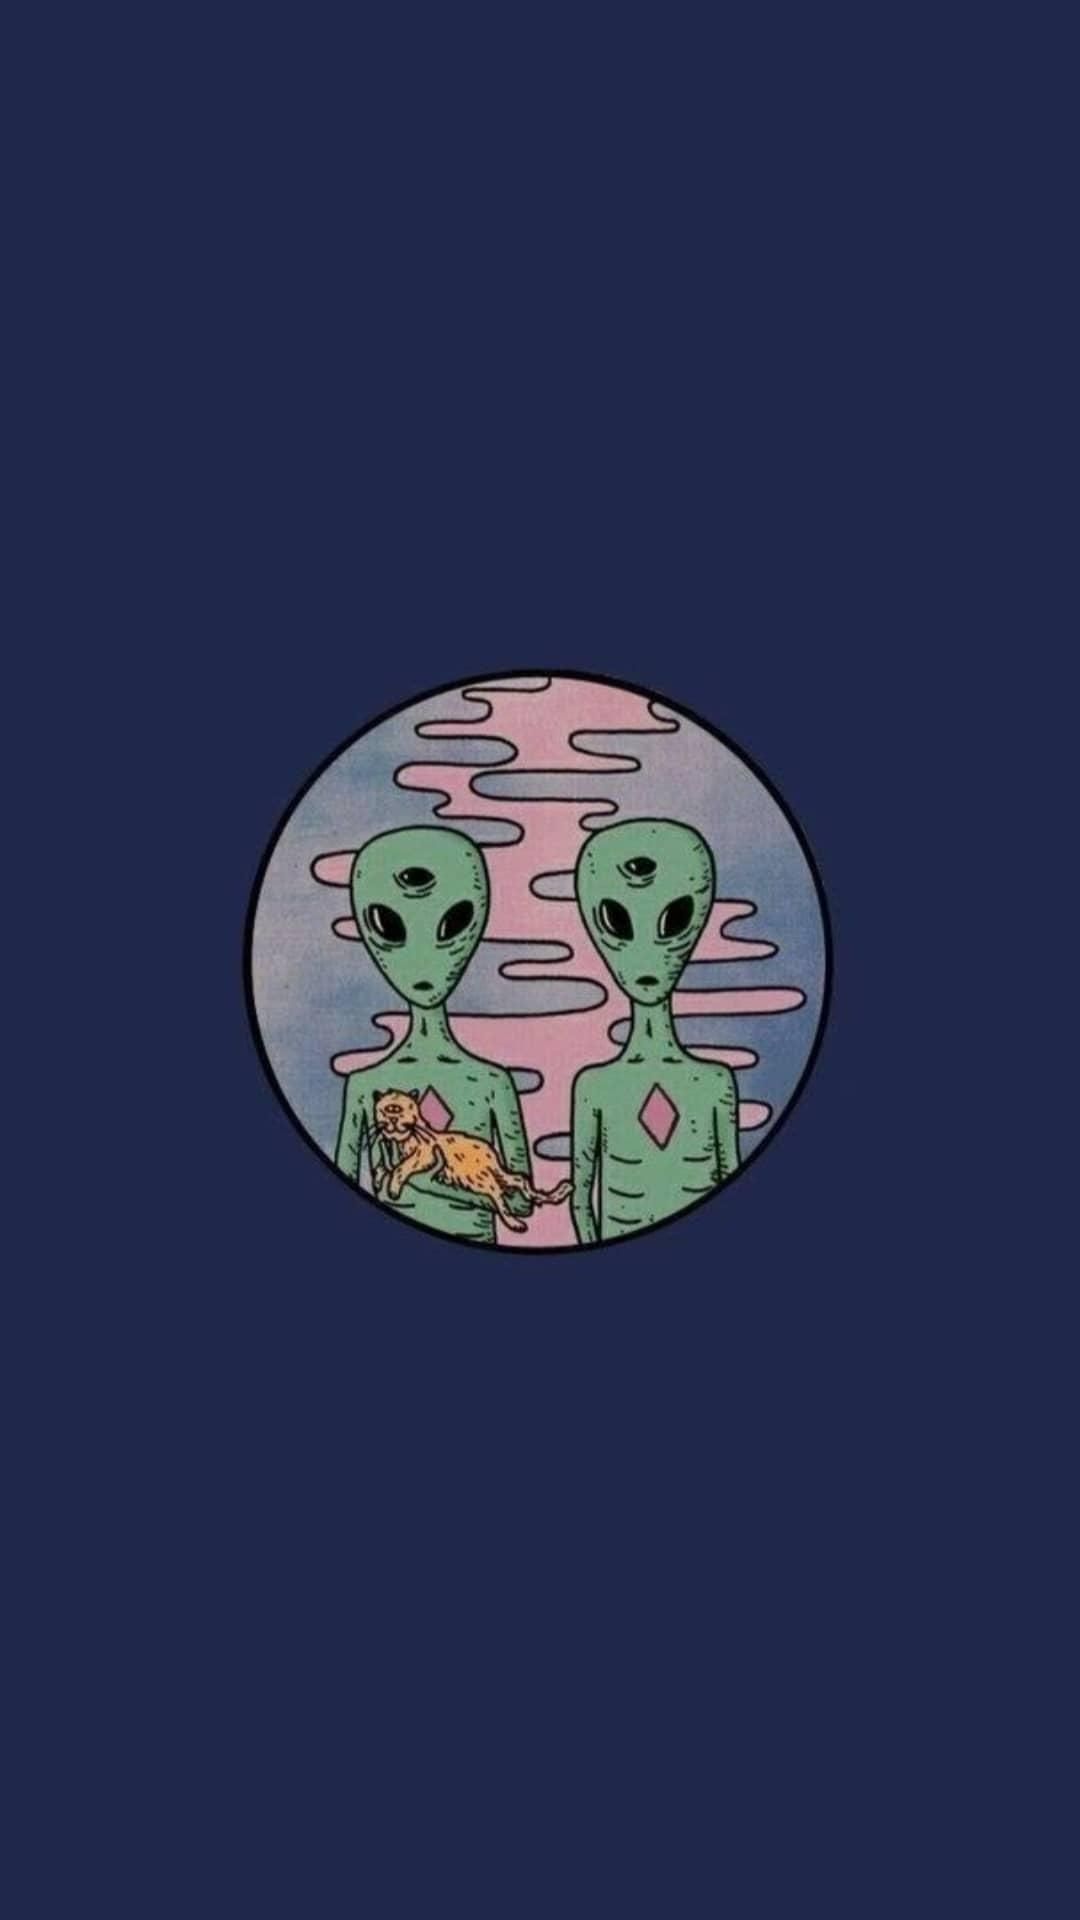 IPhone wallpaper of two aliens holding pizza and cheetos - Alien